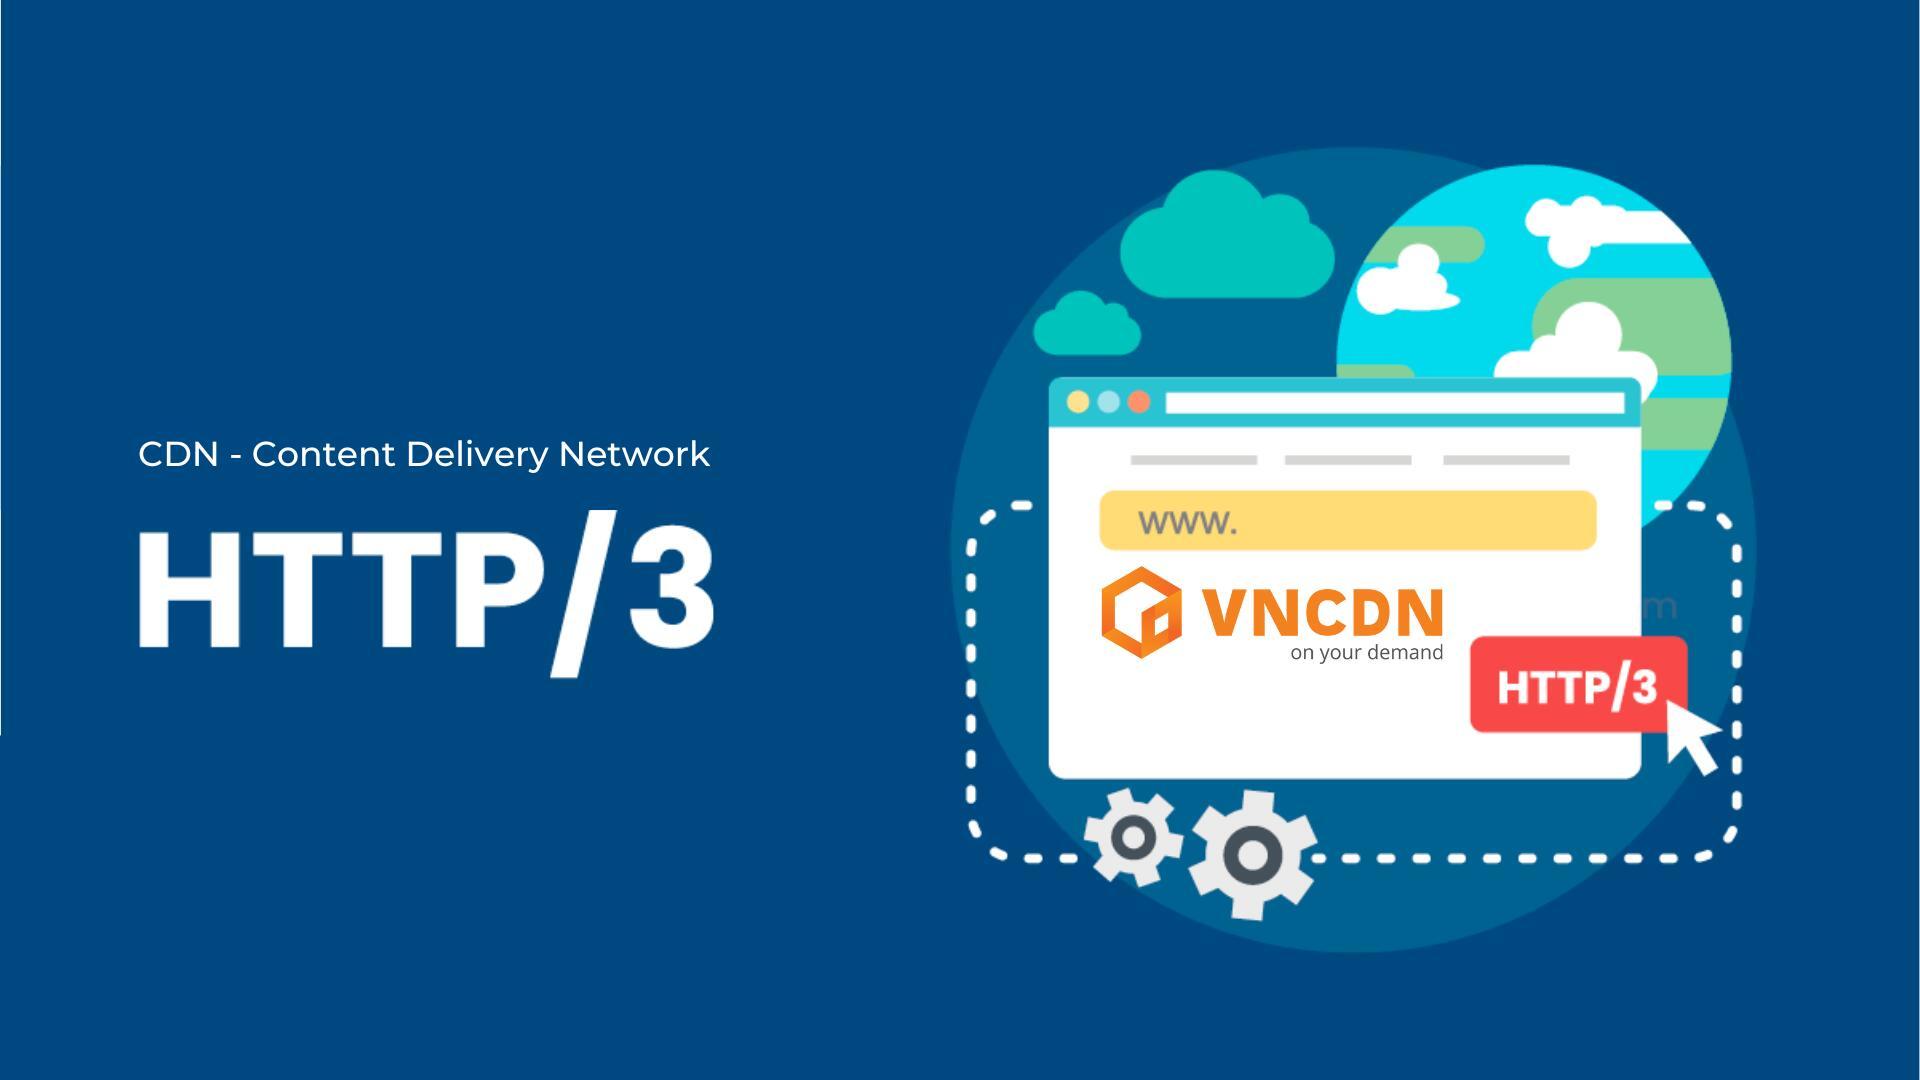 VNCDN supports HTTP/3 to speed up website performance